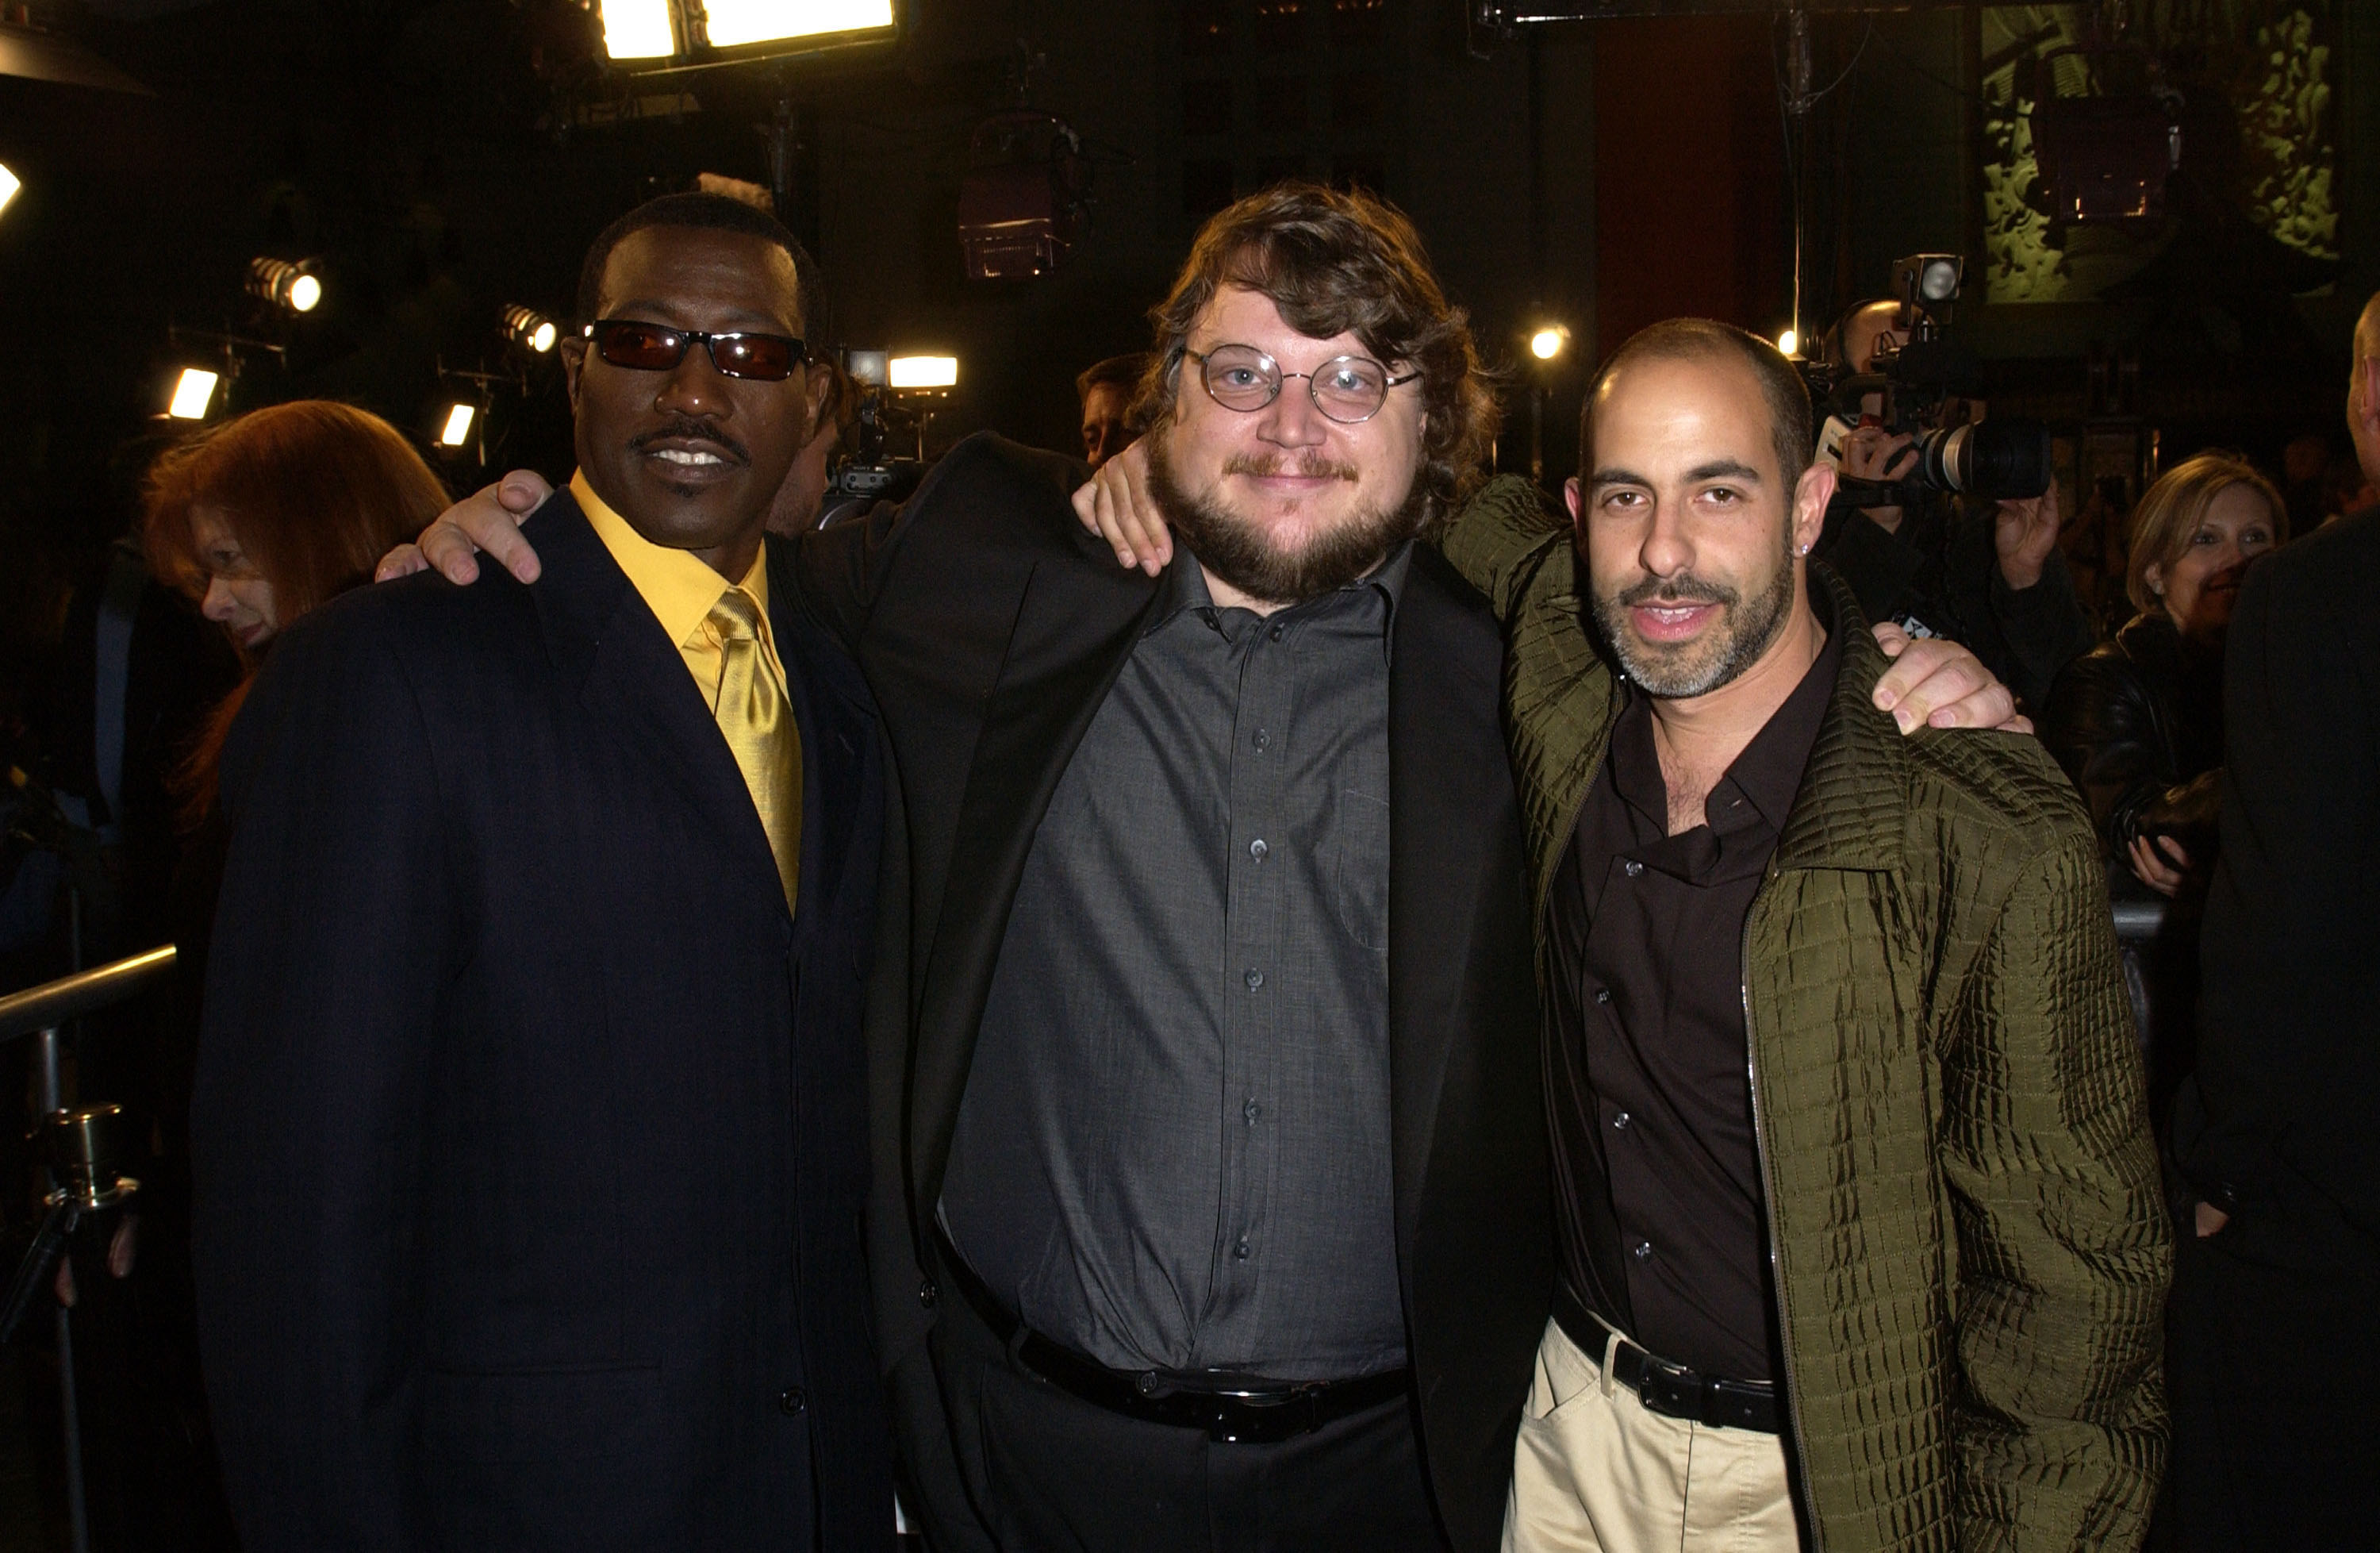 Wesley Snipes, on the left, and director David S. Goyer, on the right, pose with director Guillermo del Toro